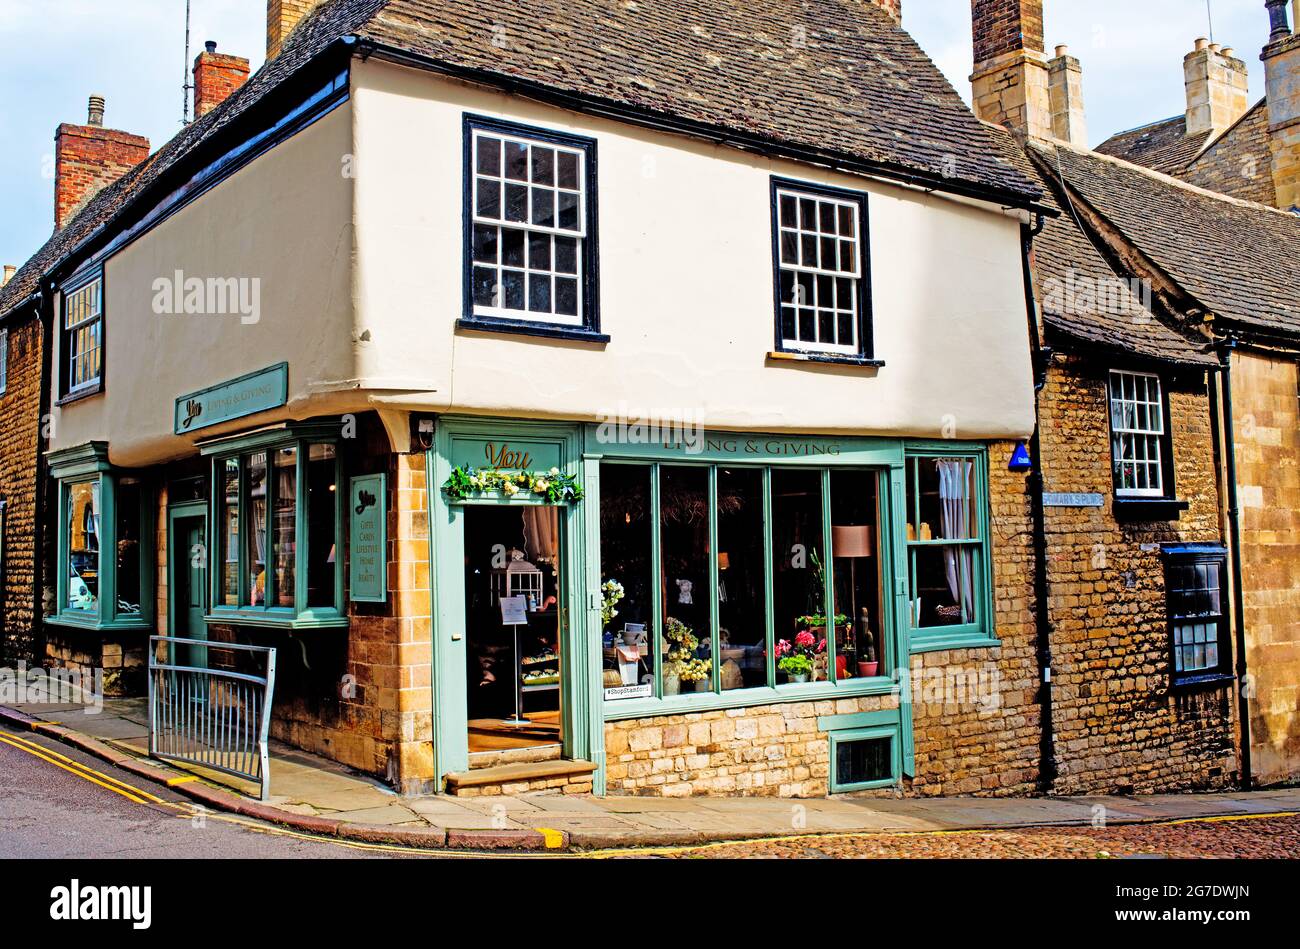 Gift shop, St Marys Street, Stamford, Lincolnshire, England Stock Photo